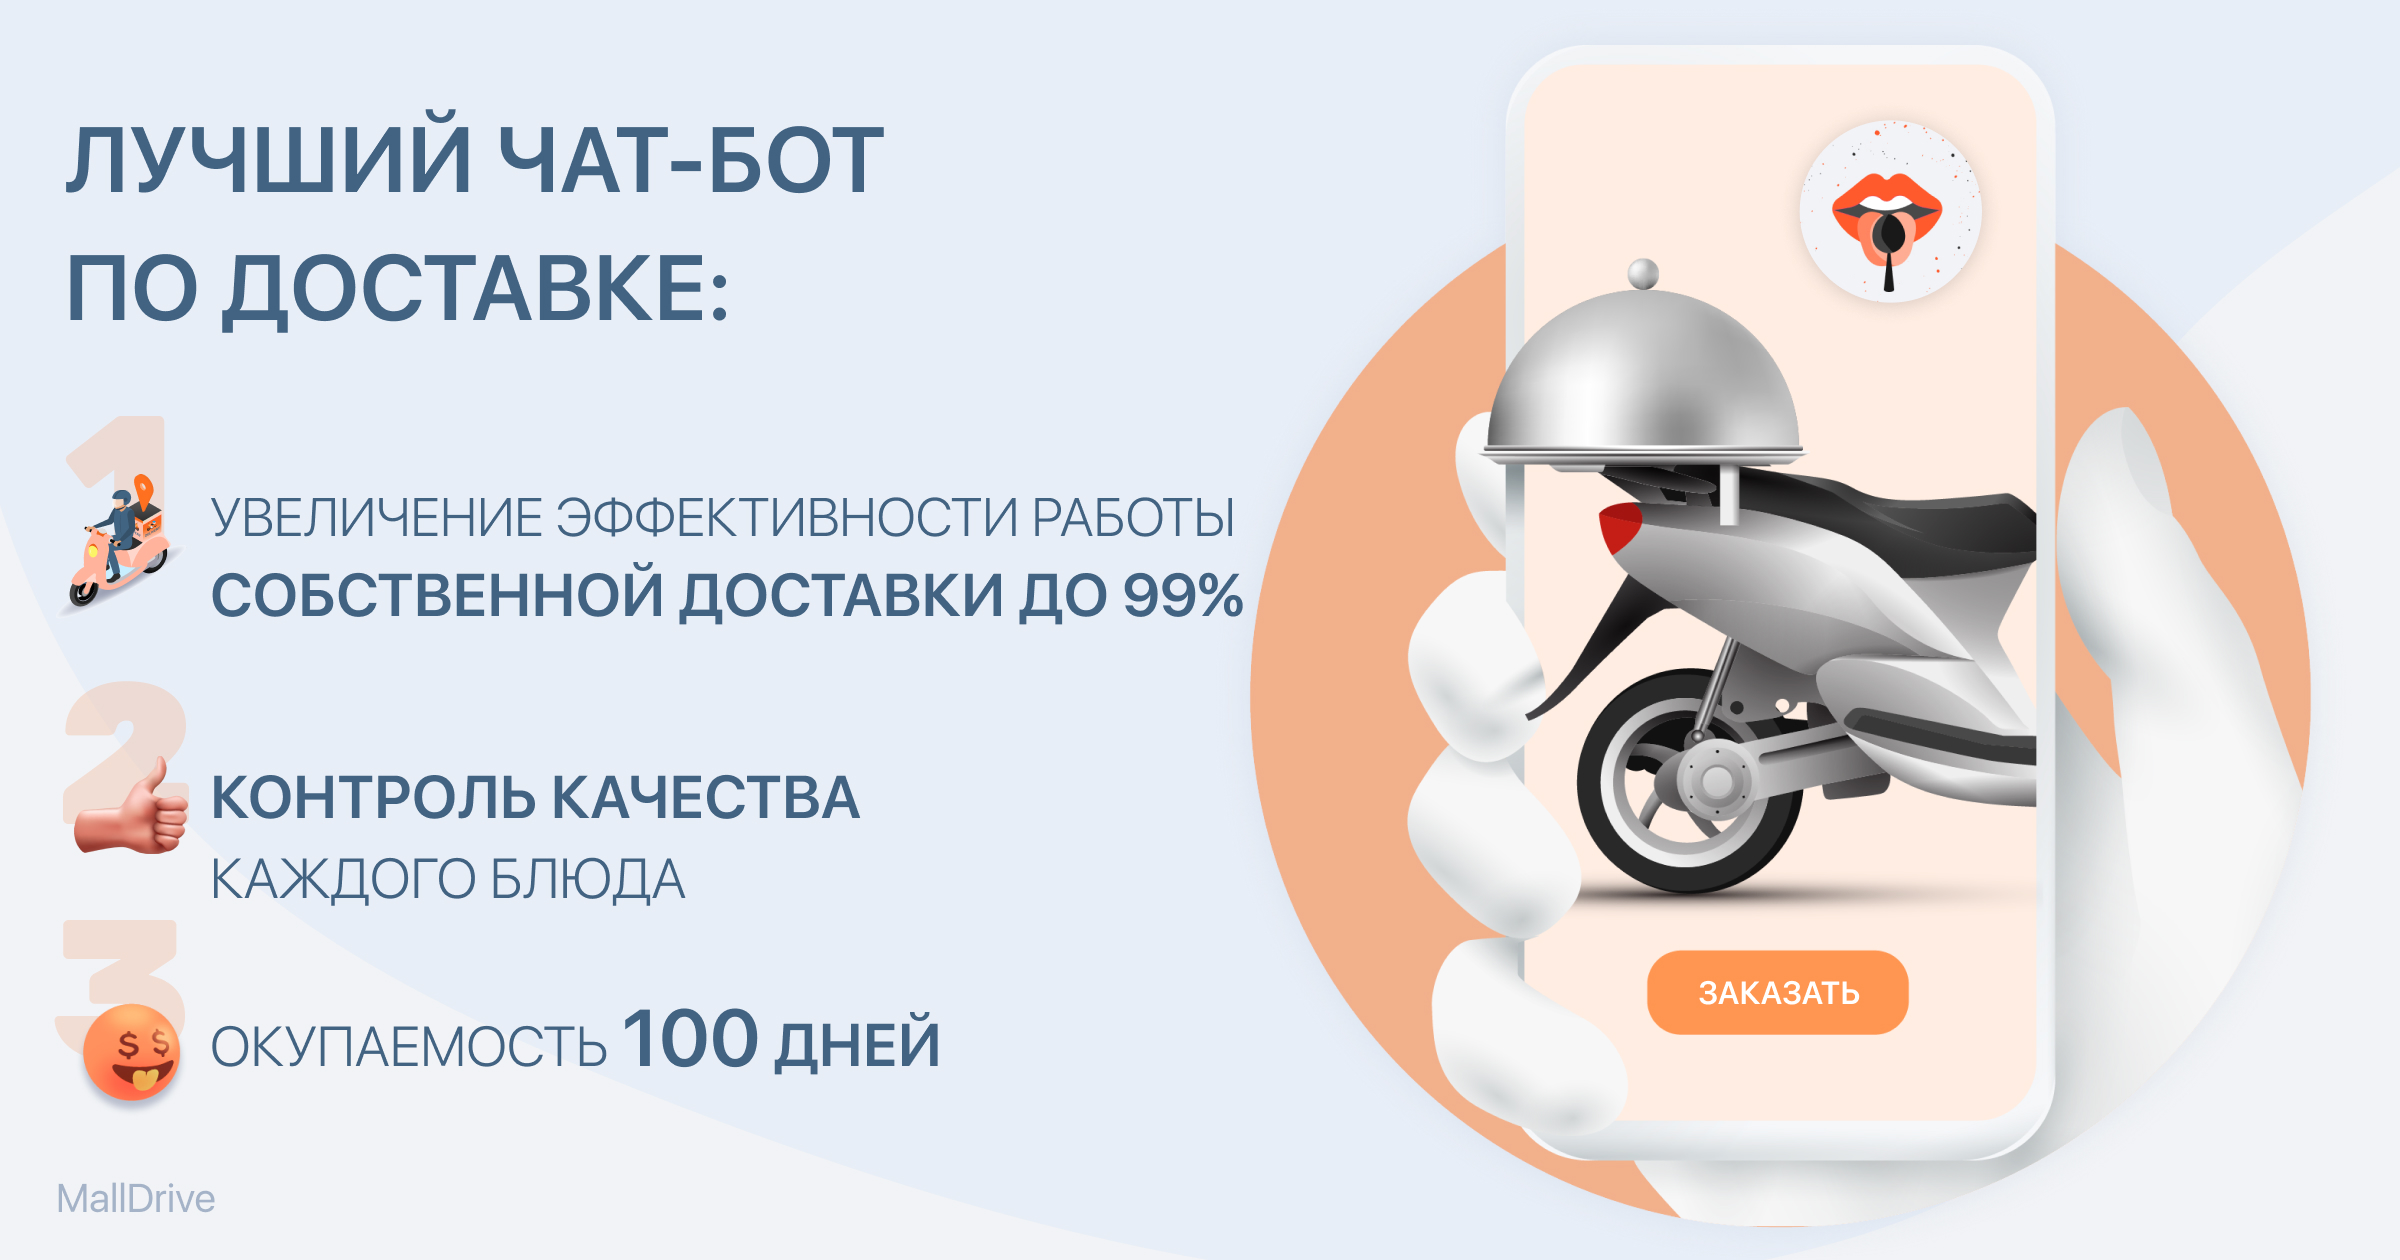 Telegram bot for sales and delivery